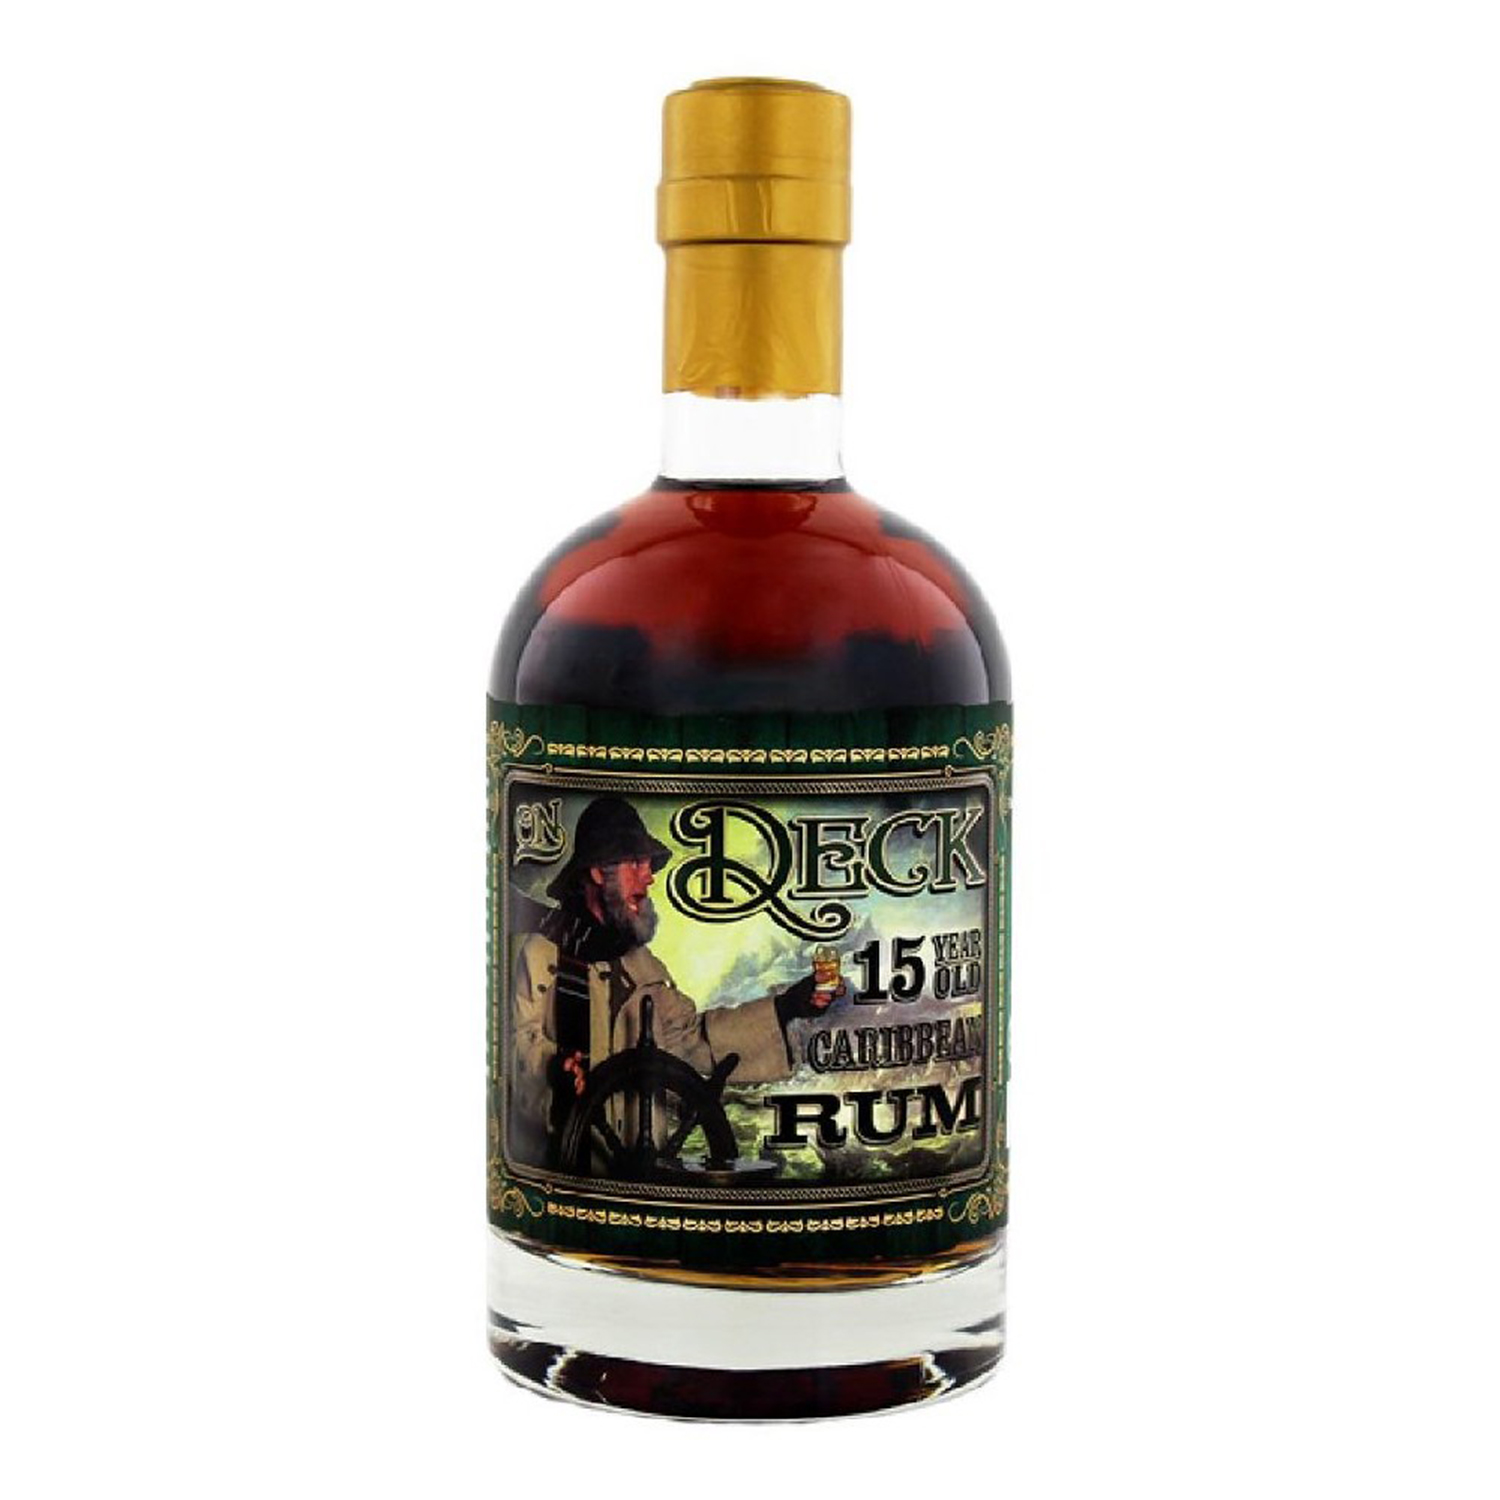 E-shop On Deck 15y Old Carribean rum 40% 0,7L